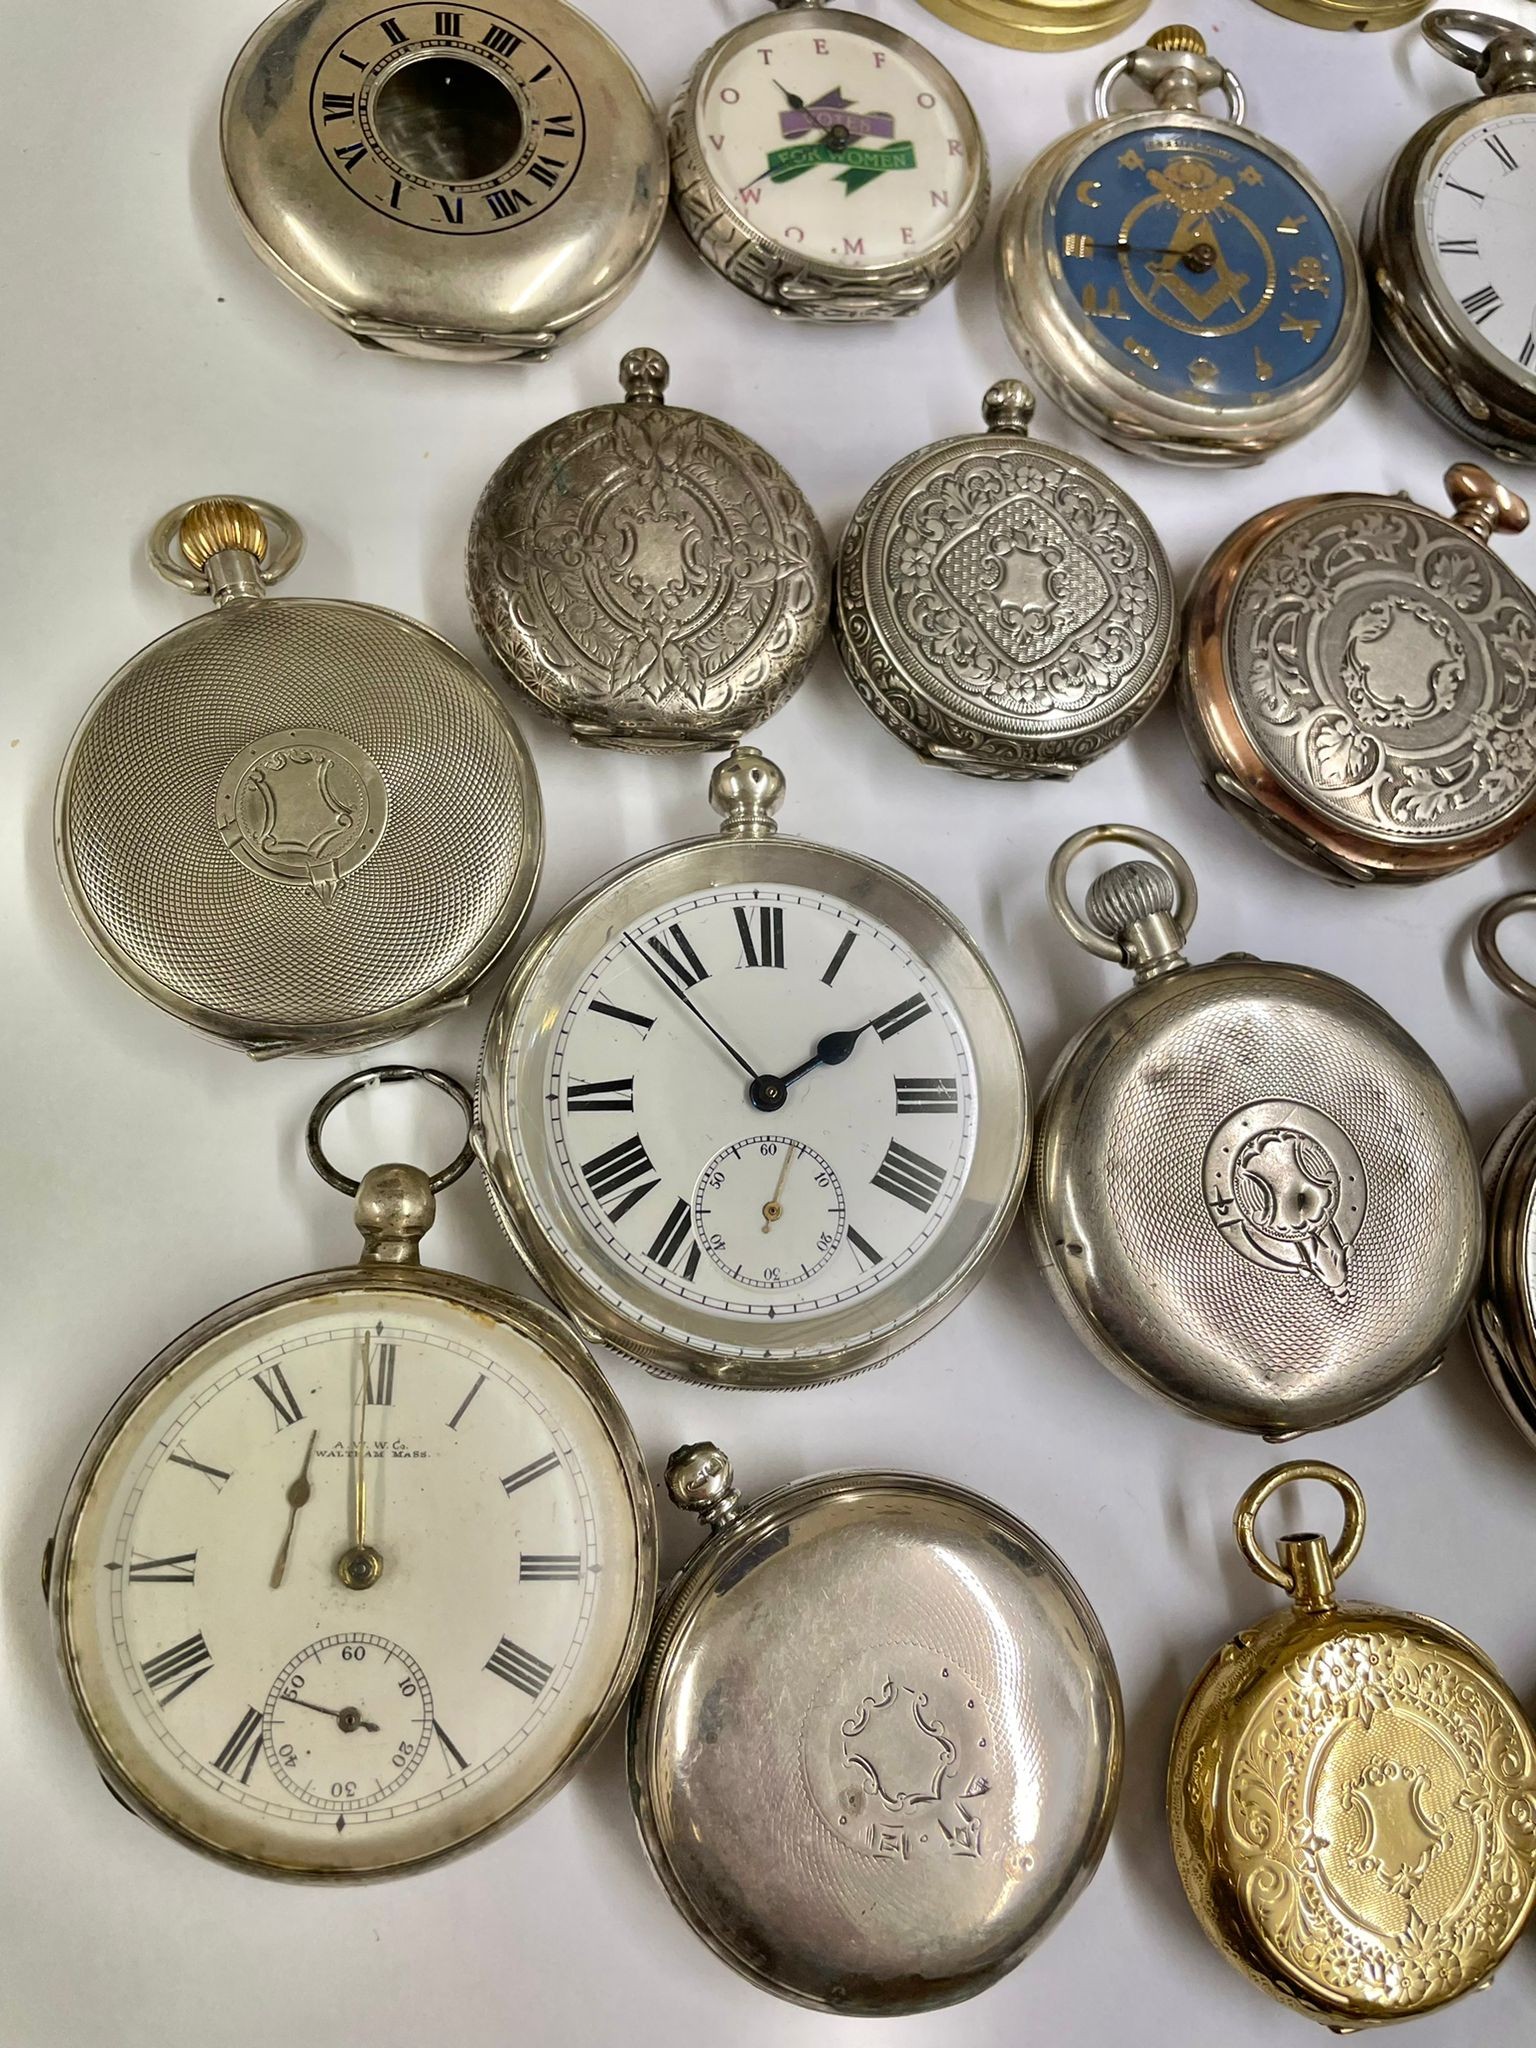 Antique & vintage silver pocket watches fusee, Waltham etc some ticking sold as found - Image 6 of 11